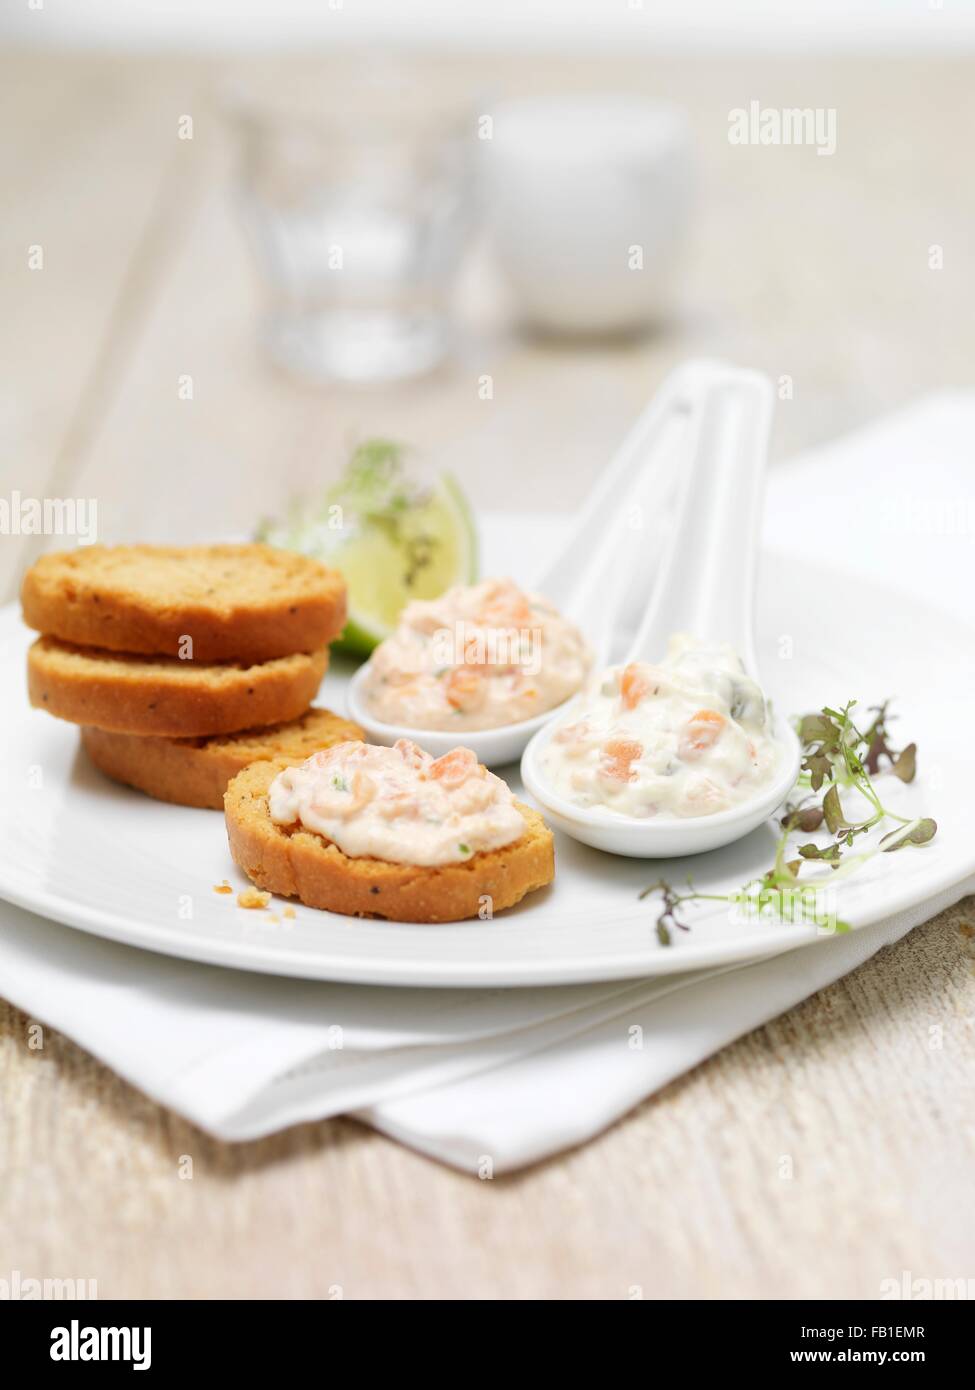 Scottish lochmuir salmon pate and tartare dipping platter with toasted bread crackers Stock Photo